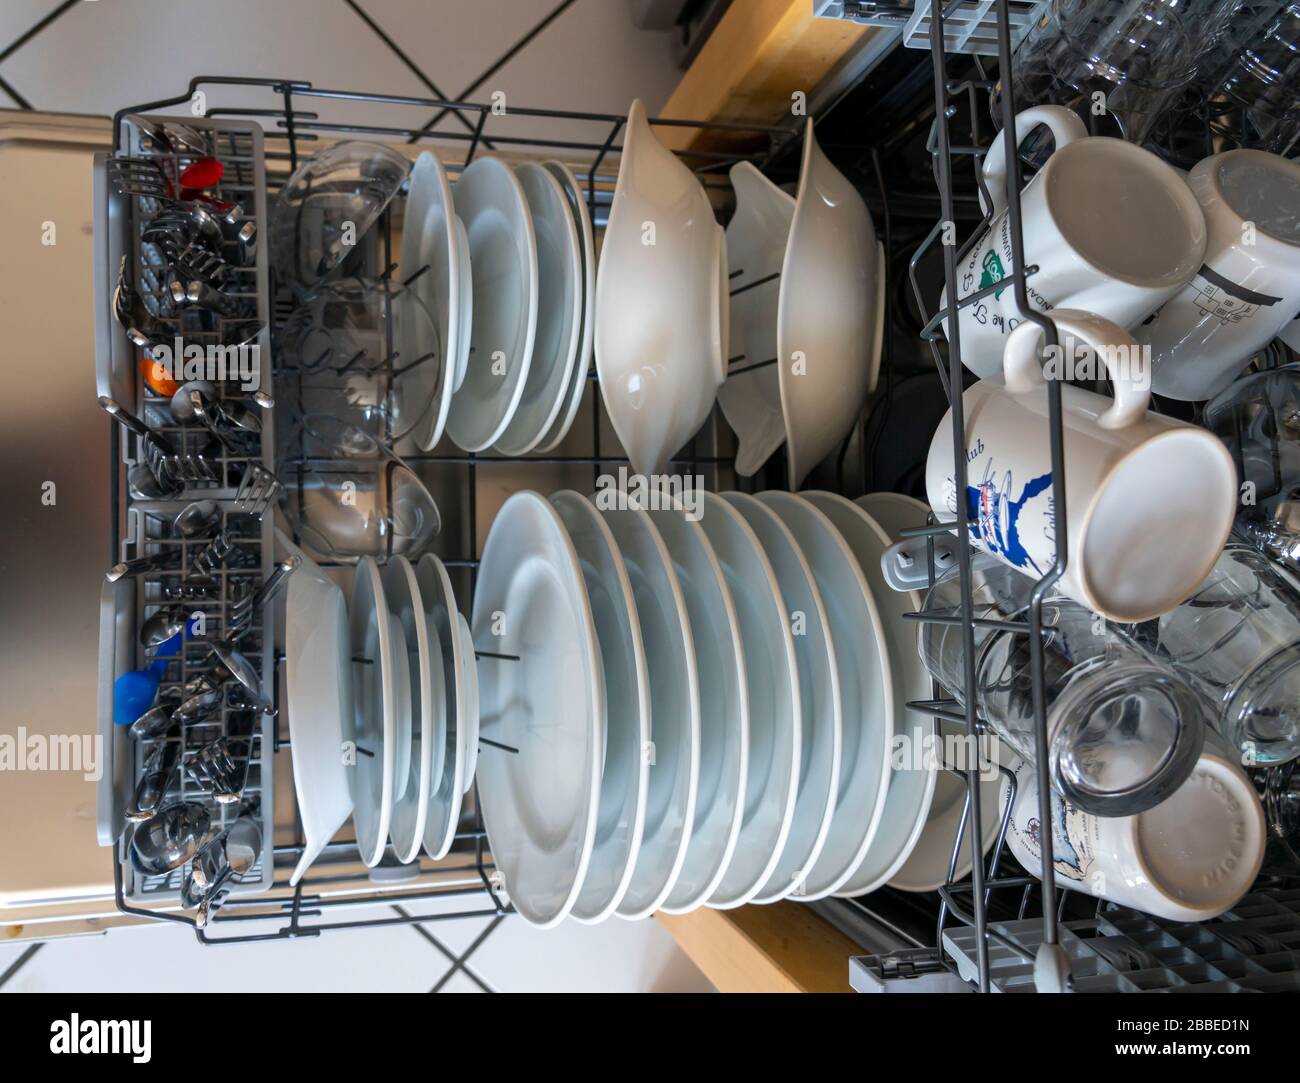 Dishwasher, full of clean dishes, Stock Photo